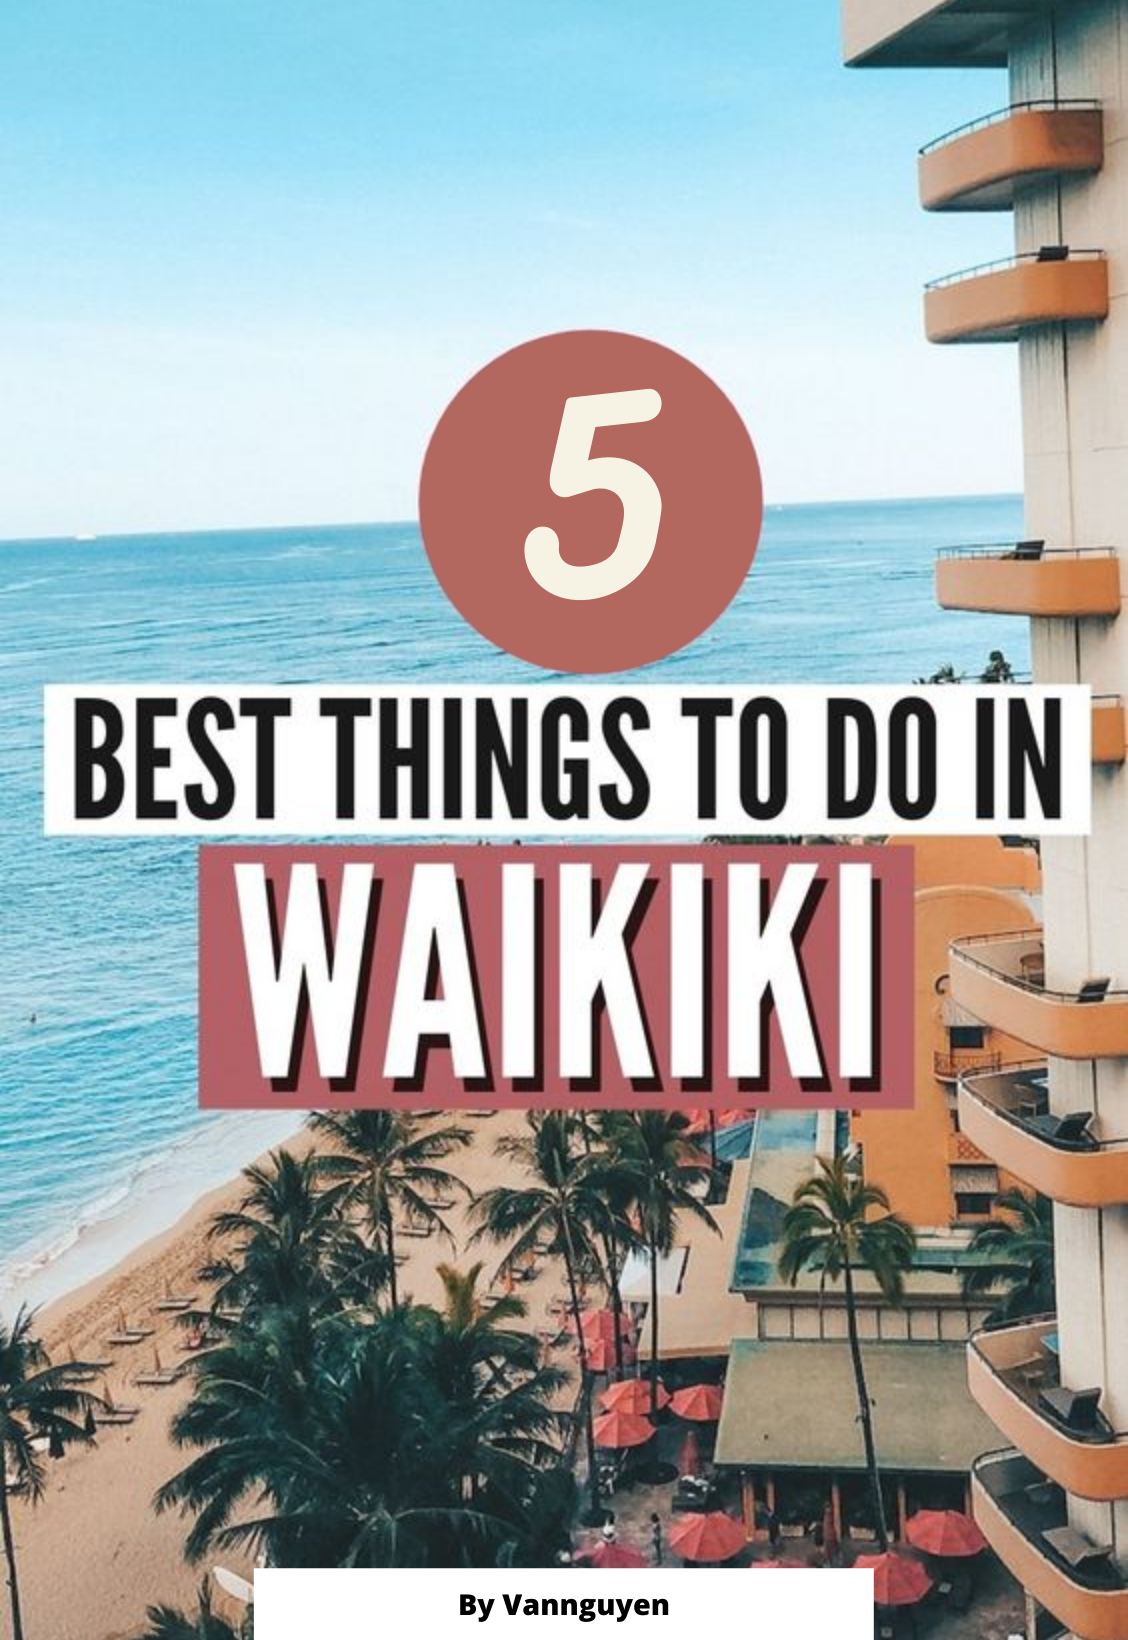 5 Best things to do in Waikiki